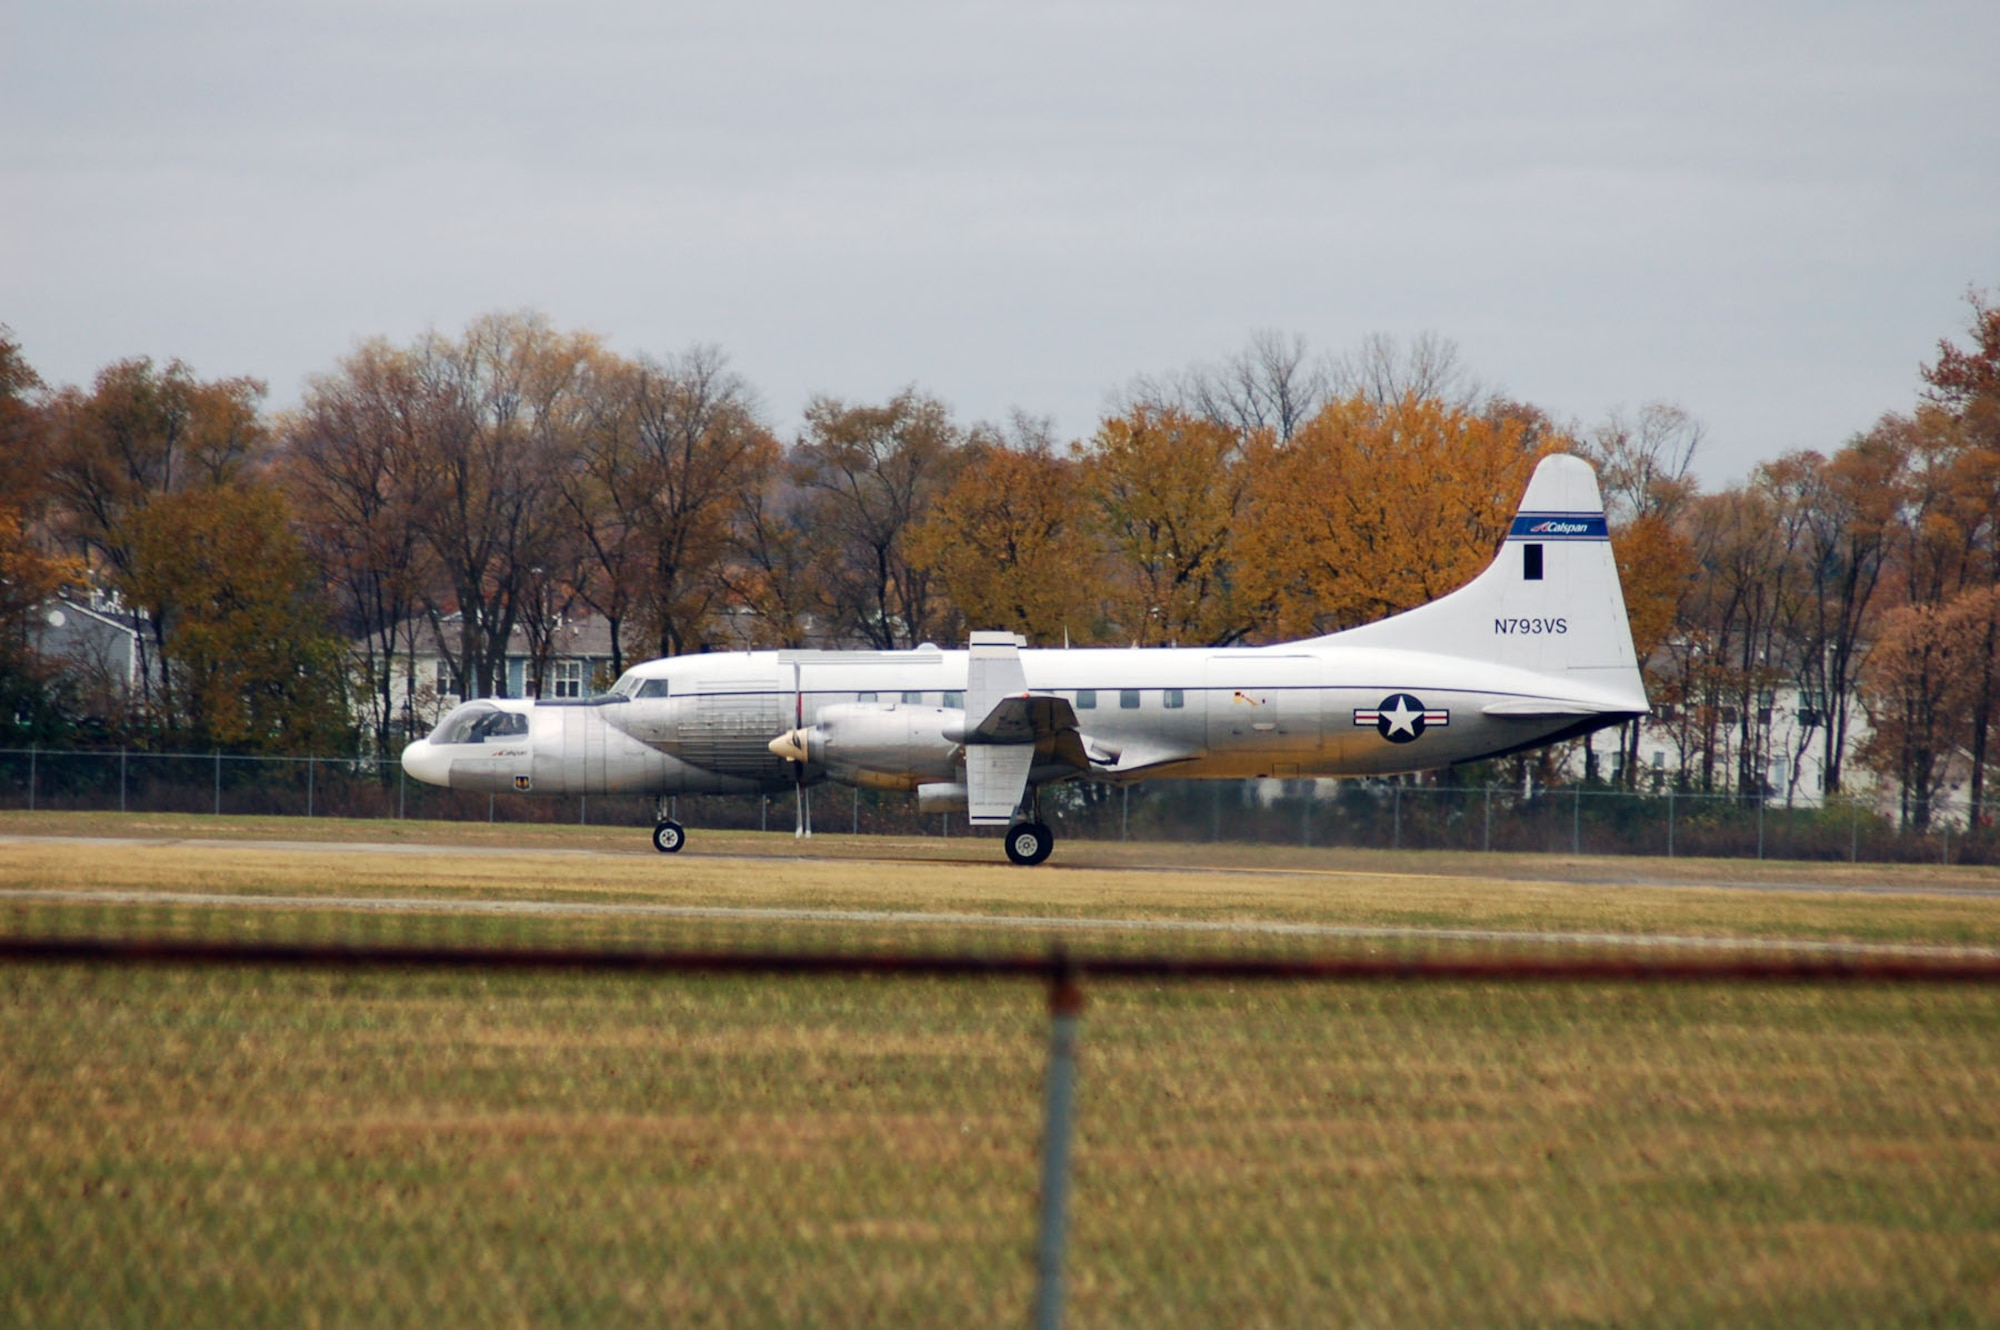 DAYTON, Ohio -- Bill Weldon of Enon, Ohio, took this photo of the Convair NC-131H as it landed at the National Museum of the United States Air Force on Nov. 7, 2008. (Photo courtesy of Bill Weldon)